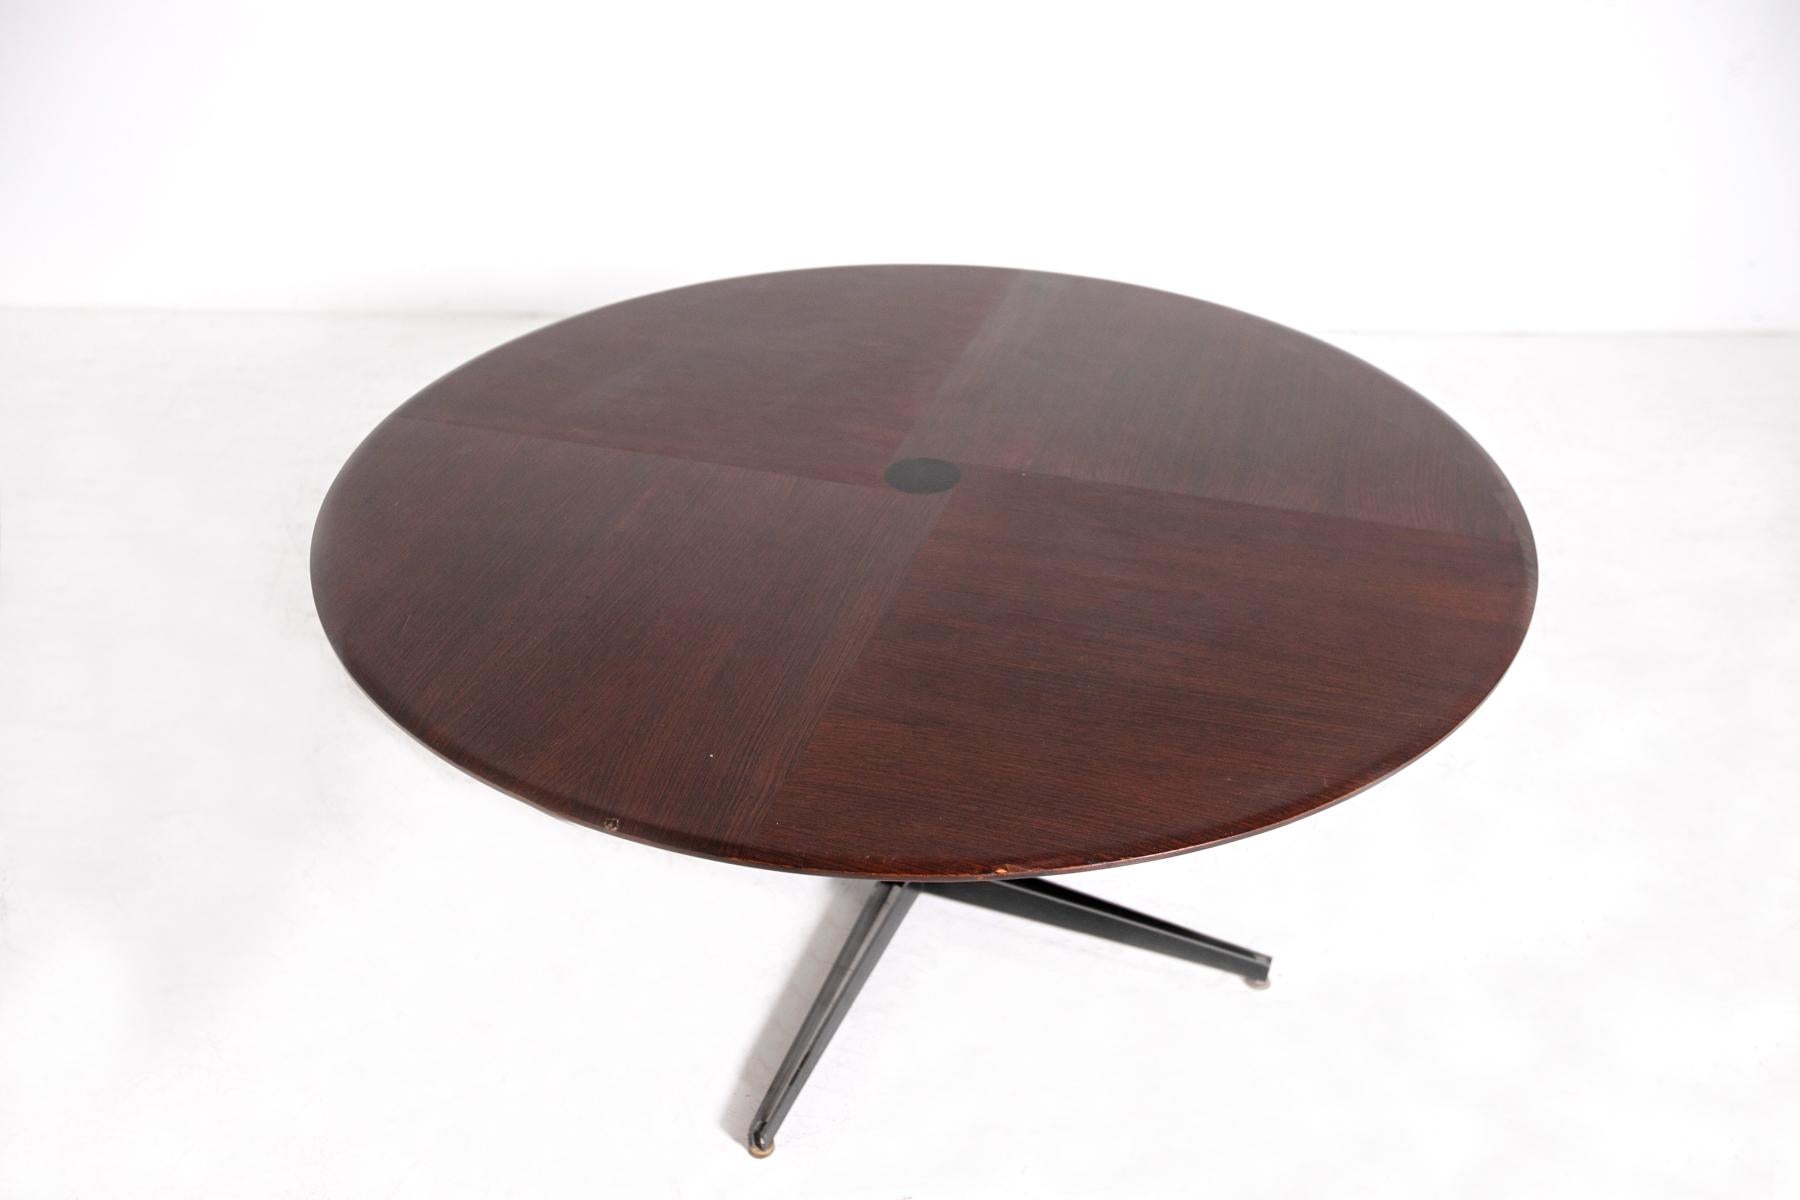 Large low table designed by Osvaldo Borsani for the Tecno manufacture in the 1950s. The low table is made of fine wood with a circular shape. Its round table top features expert woodwork. Its painted iron pedestal structure gives the piece of